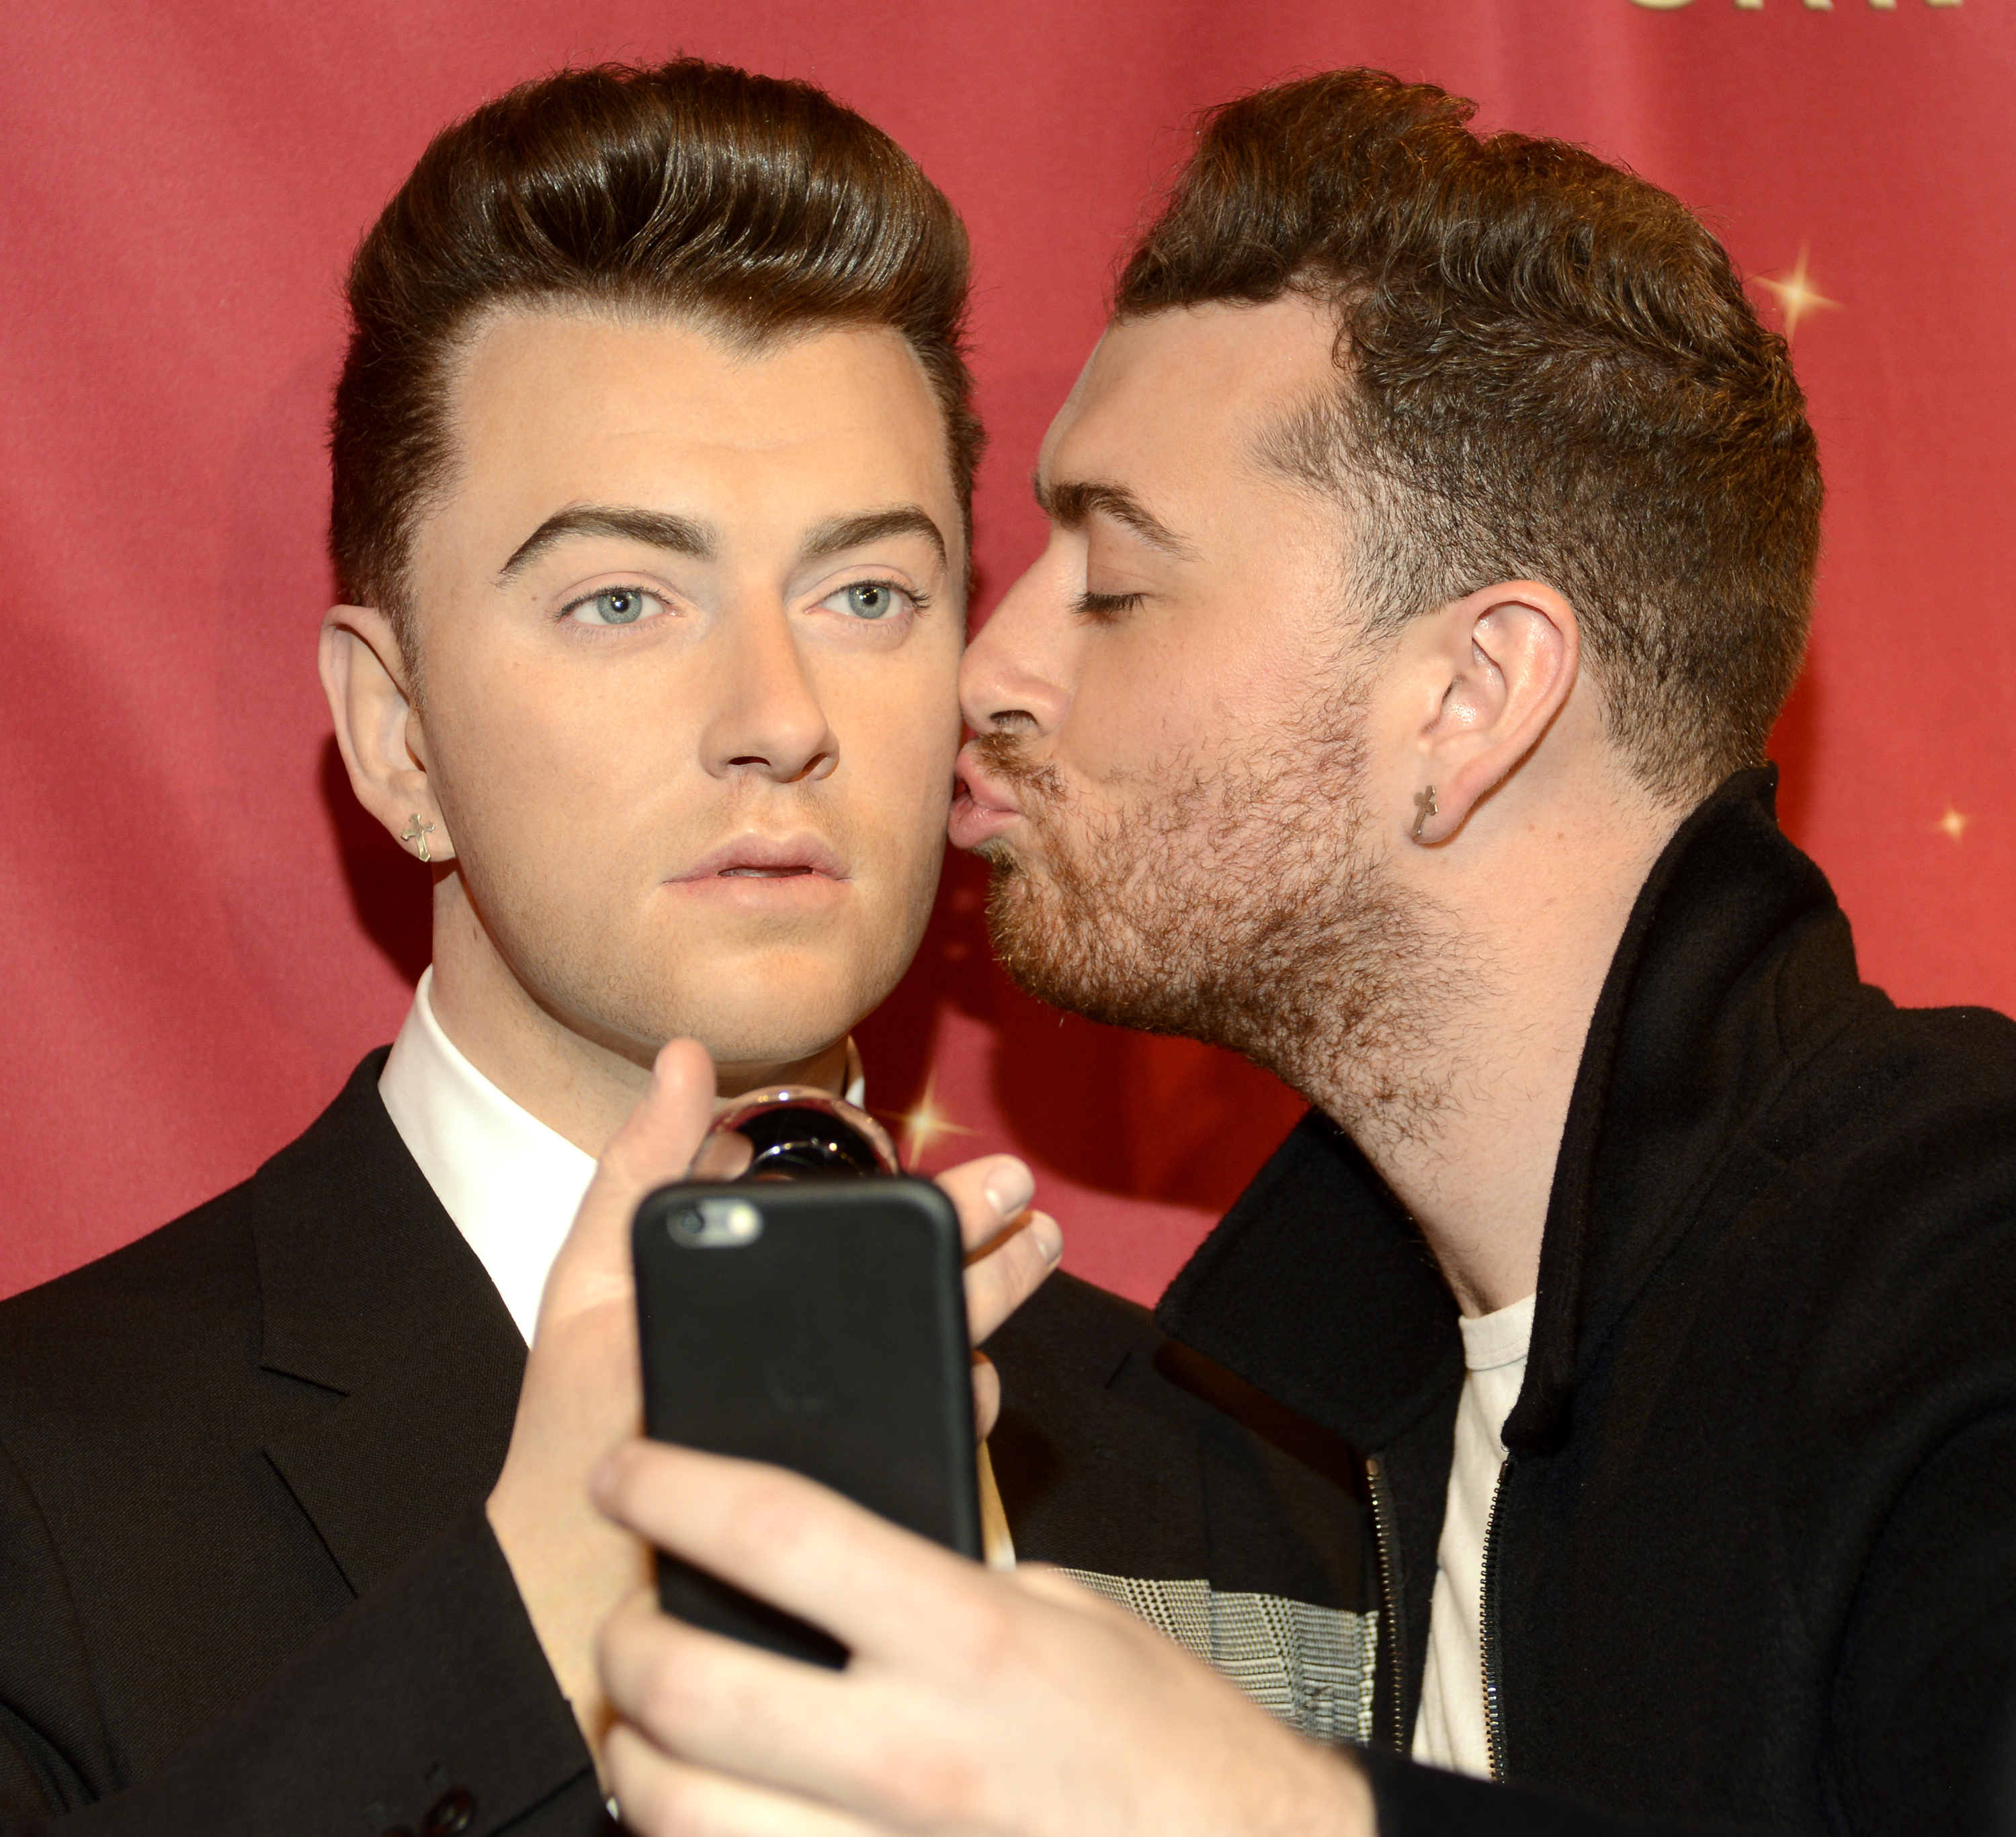 Sam Smith with is wax figurine at Madame Tussauds San Francisco on Aug.10, 2015 in San Francisco. (Tim Mosenfelder&mdash;Getty Images)